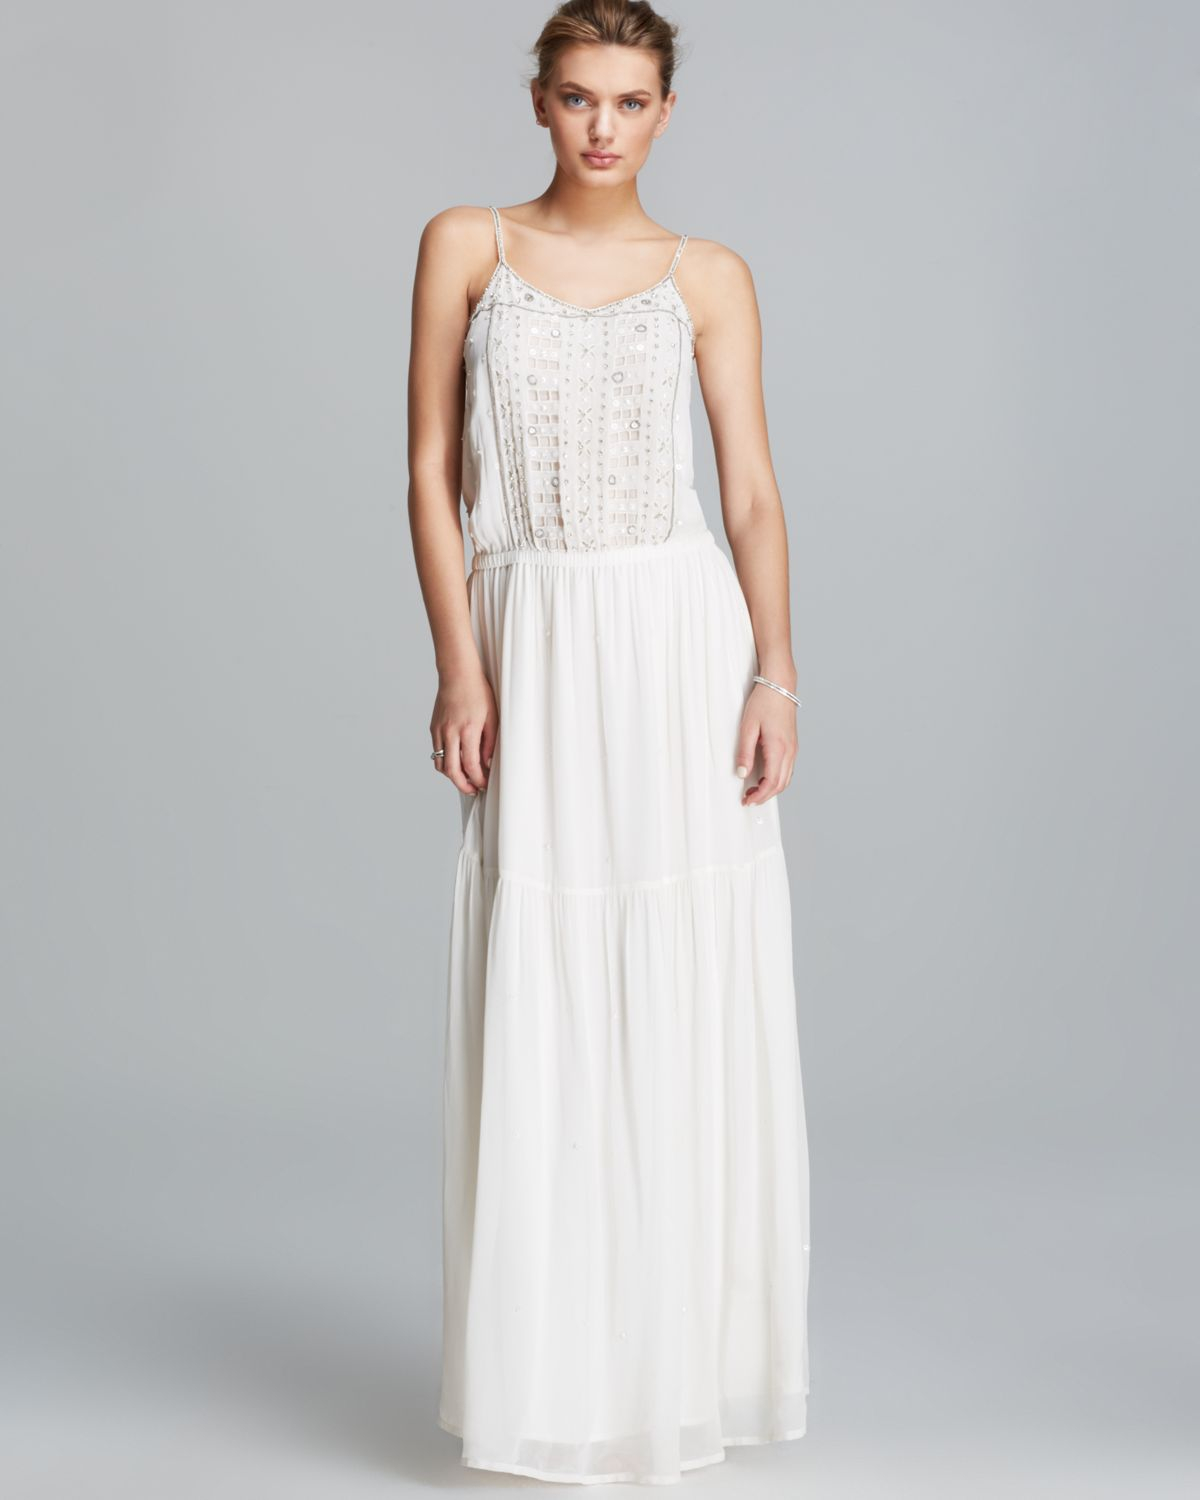 French Connection Maxi Dress - California Dreaming in White - Lyst